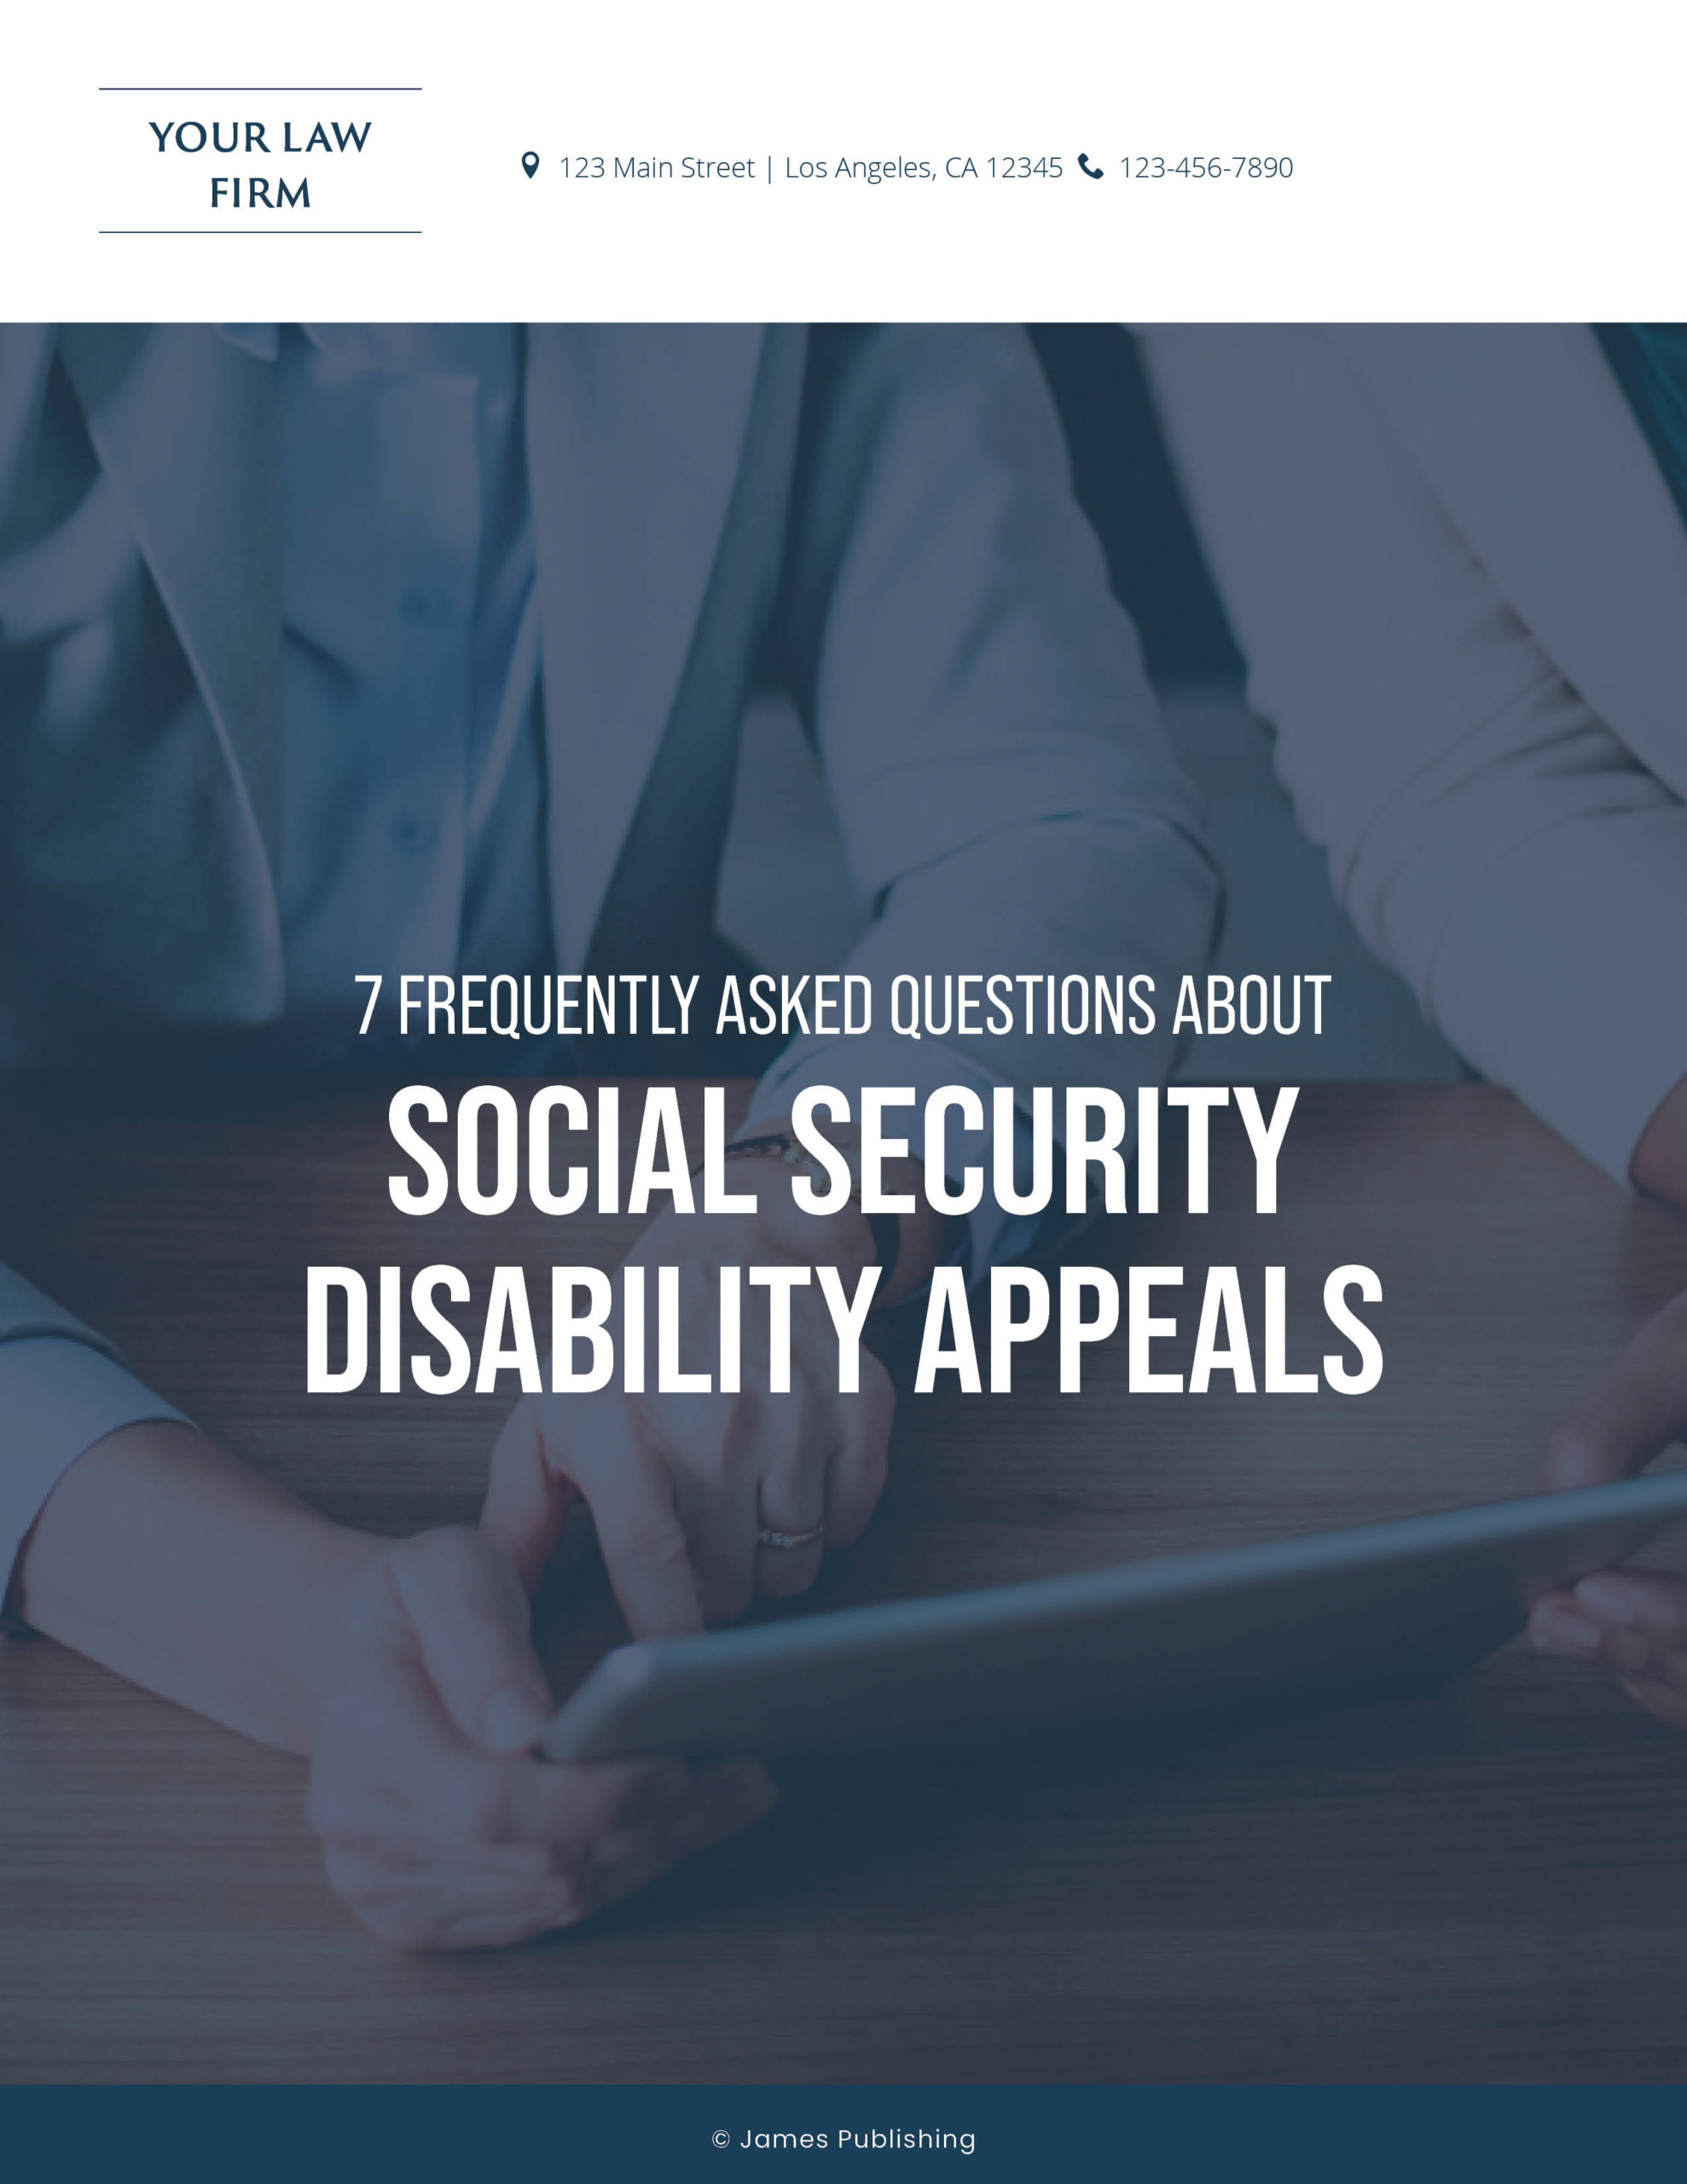 SSD-14 7 Frequently Asked Questions About Social Security Disability Appeals